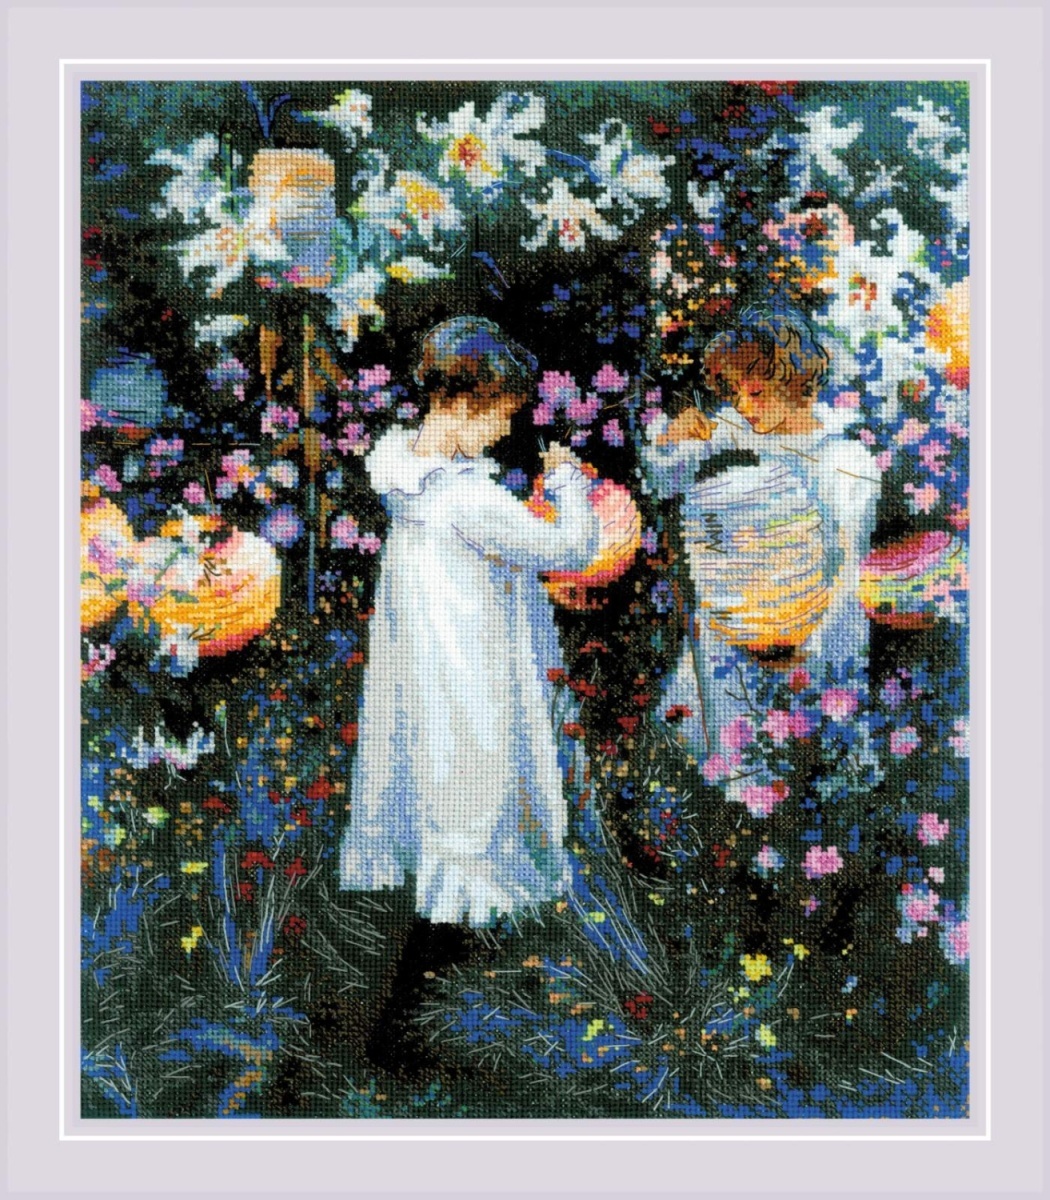 Carnation, Lily, Lily, Rose after J. S. Sargent's Painting Cross Stitch Kit фото 1